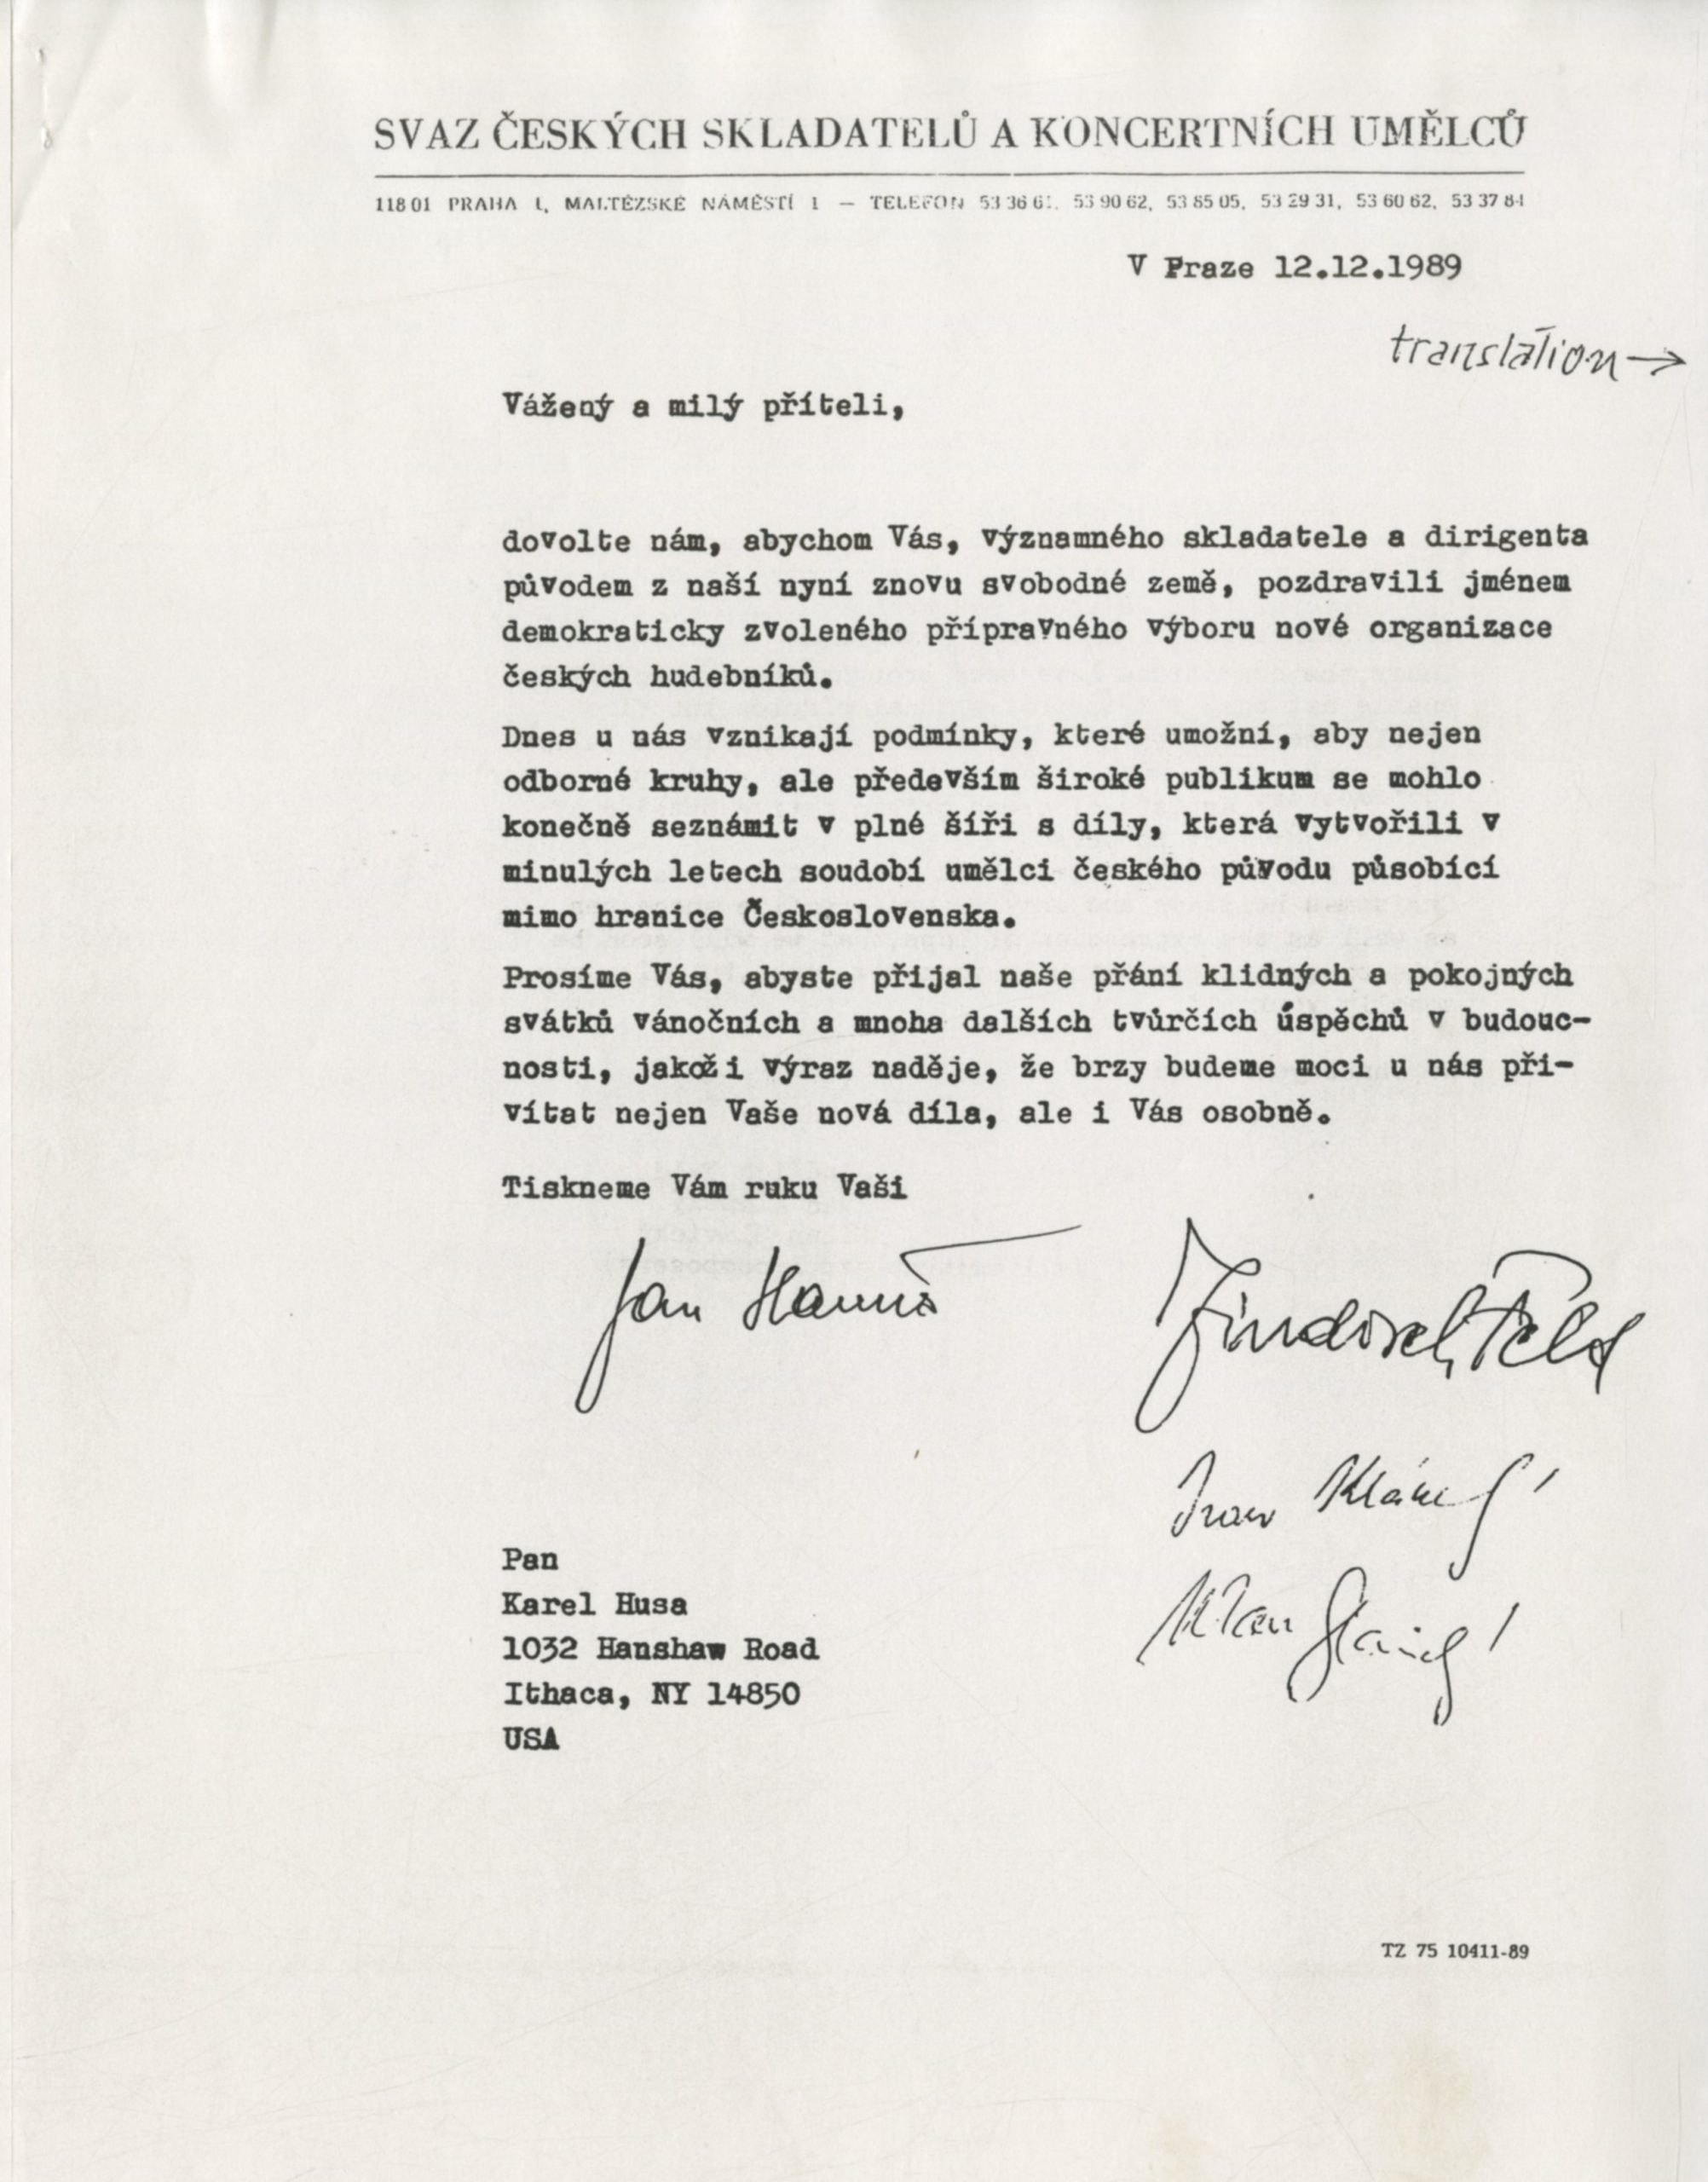 Letter from Czech Composer’s Union.